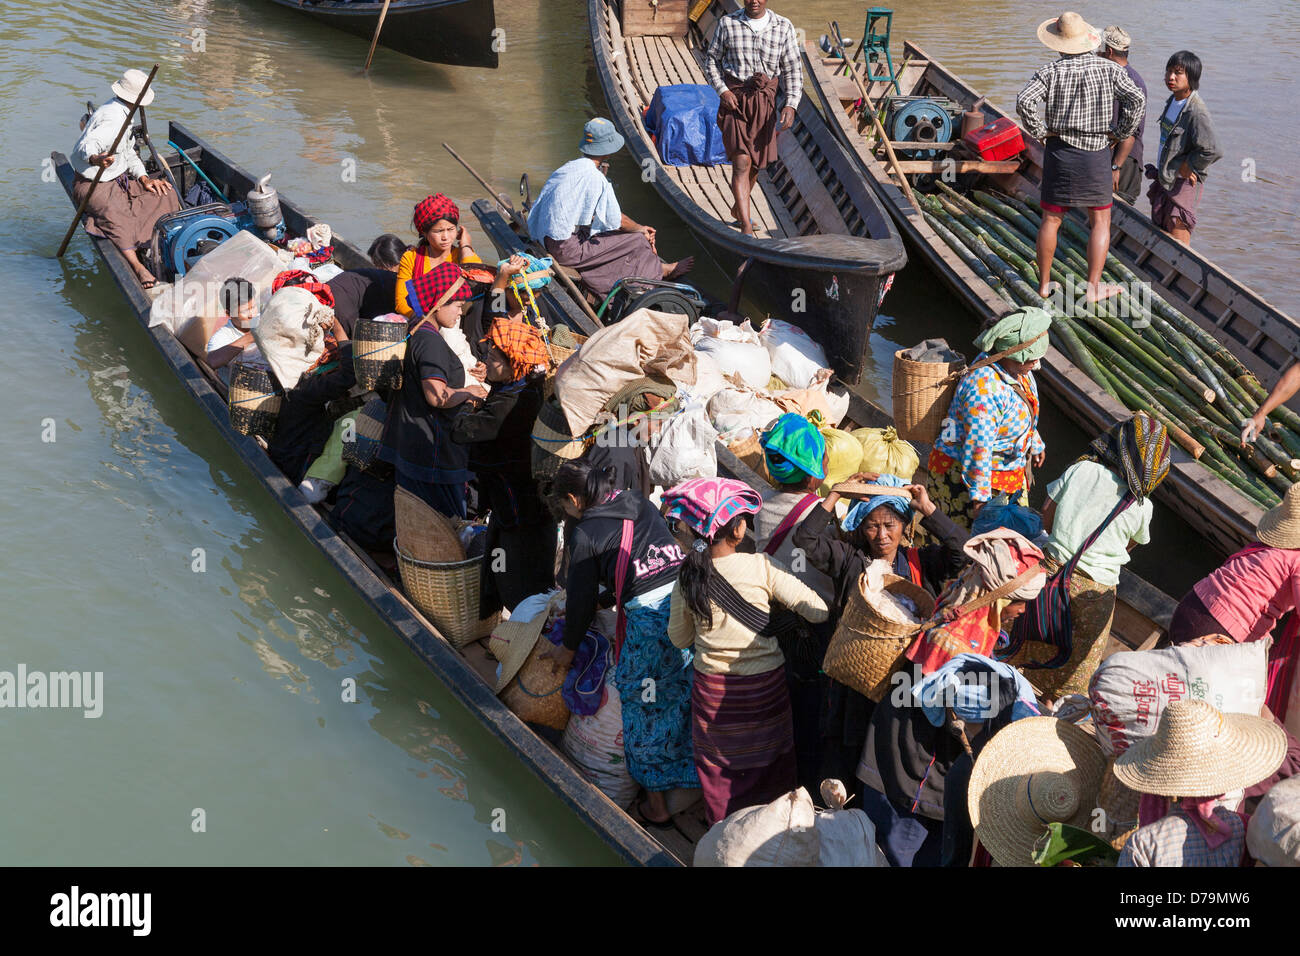 Villagers disembarking from a boat, Inle Lake, near Indein and Nyaung Ohak villages, Shan State, Myanmar, (Burma) Stock Photo